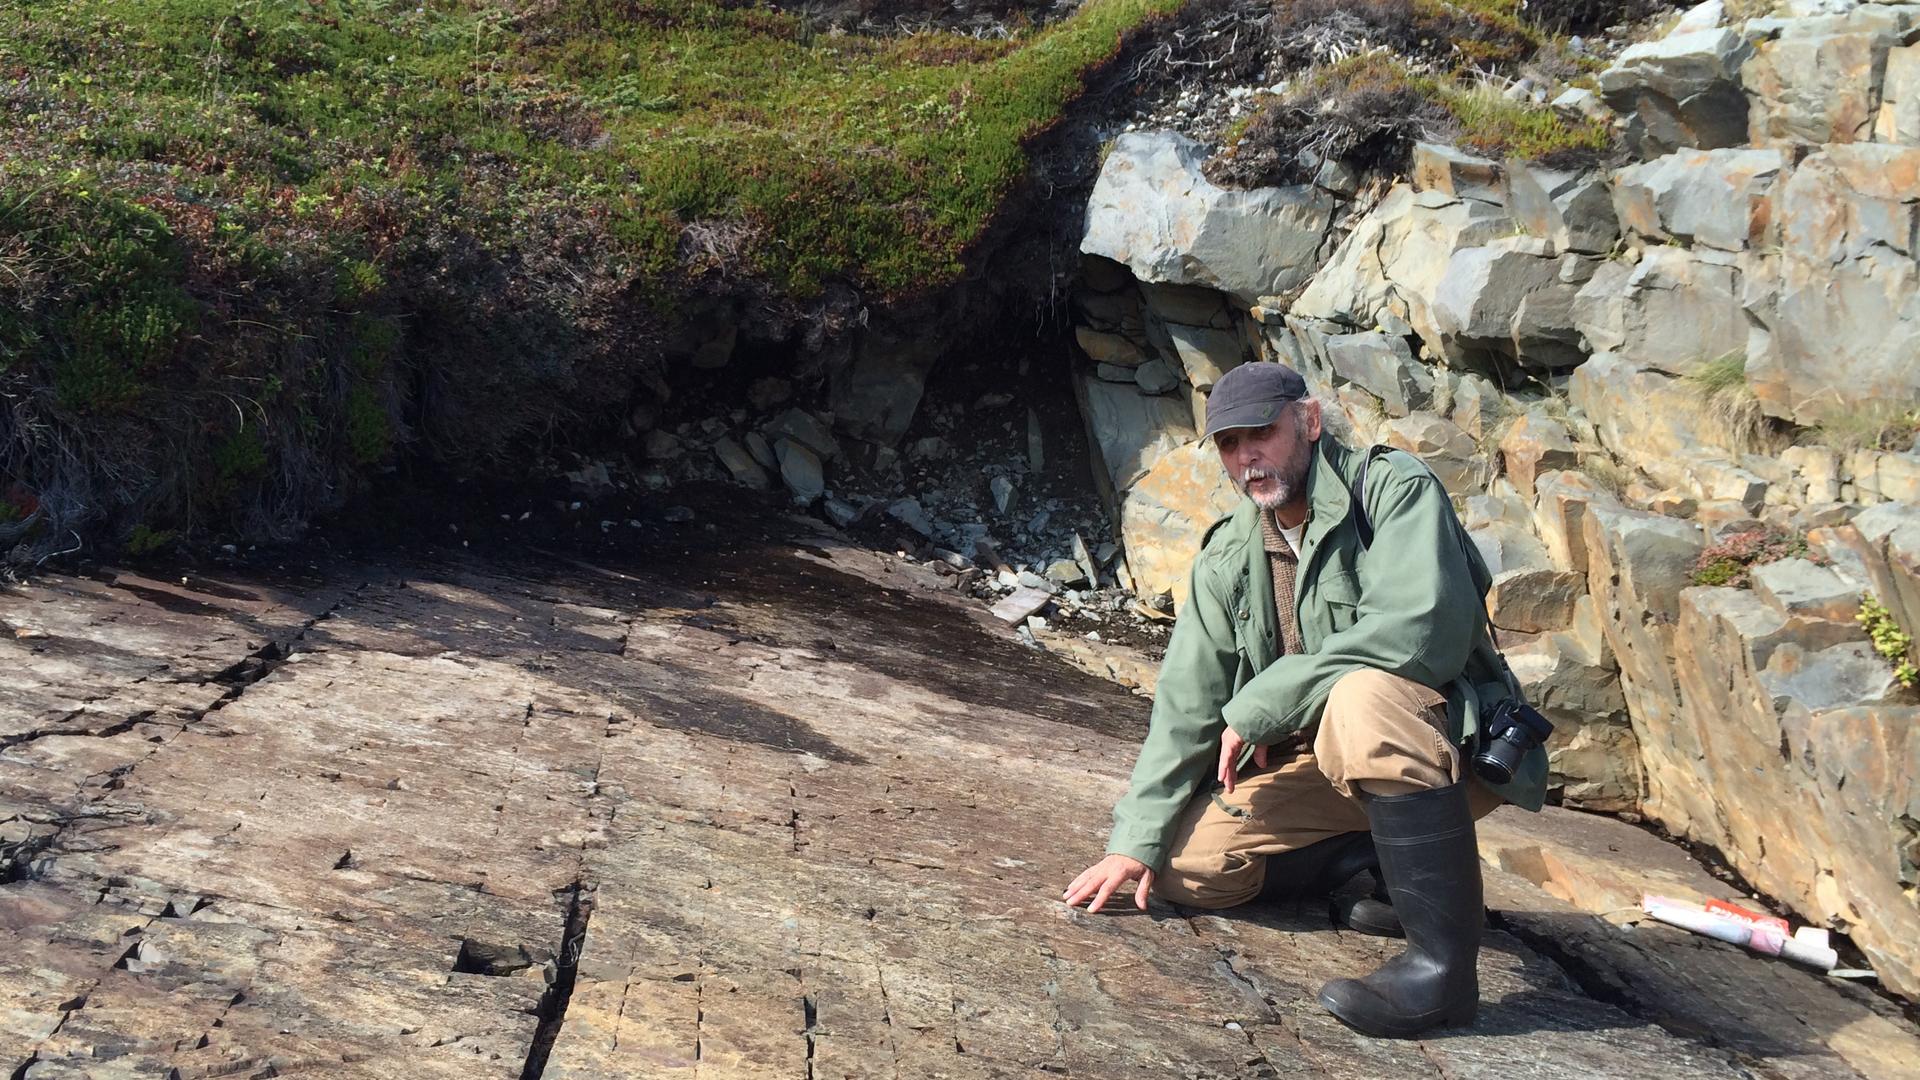 Don Johnson, a former park ranger, on a fossil walk near his home on the Bonavista Peninsula in Newfoundland. As a kid, he used to climb on these rocks, but he says people here never know the fossils in these rocks were so significant.